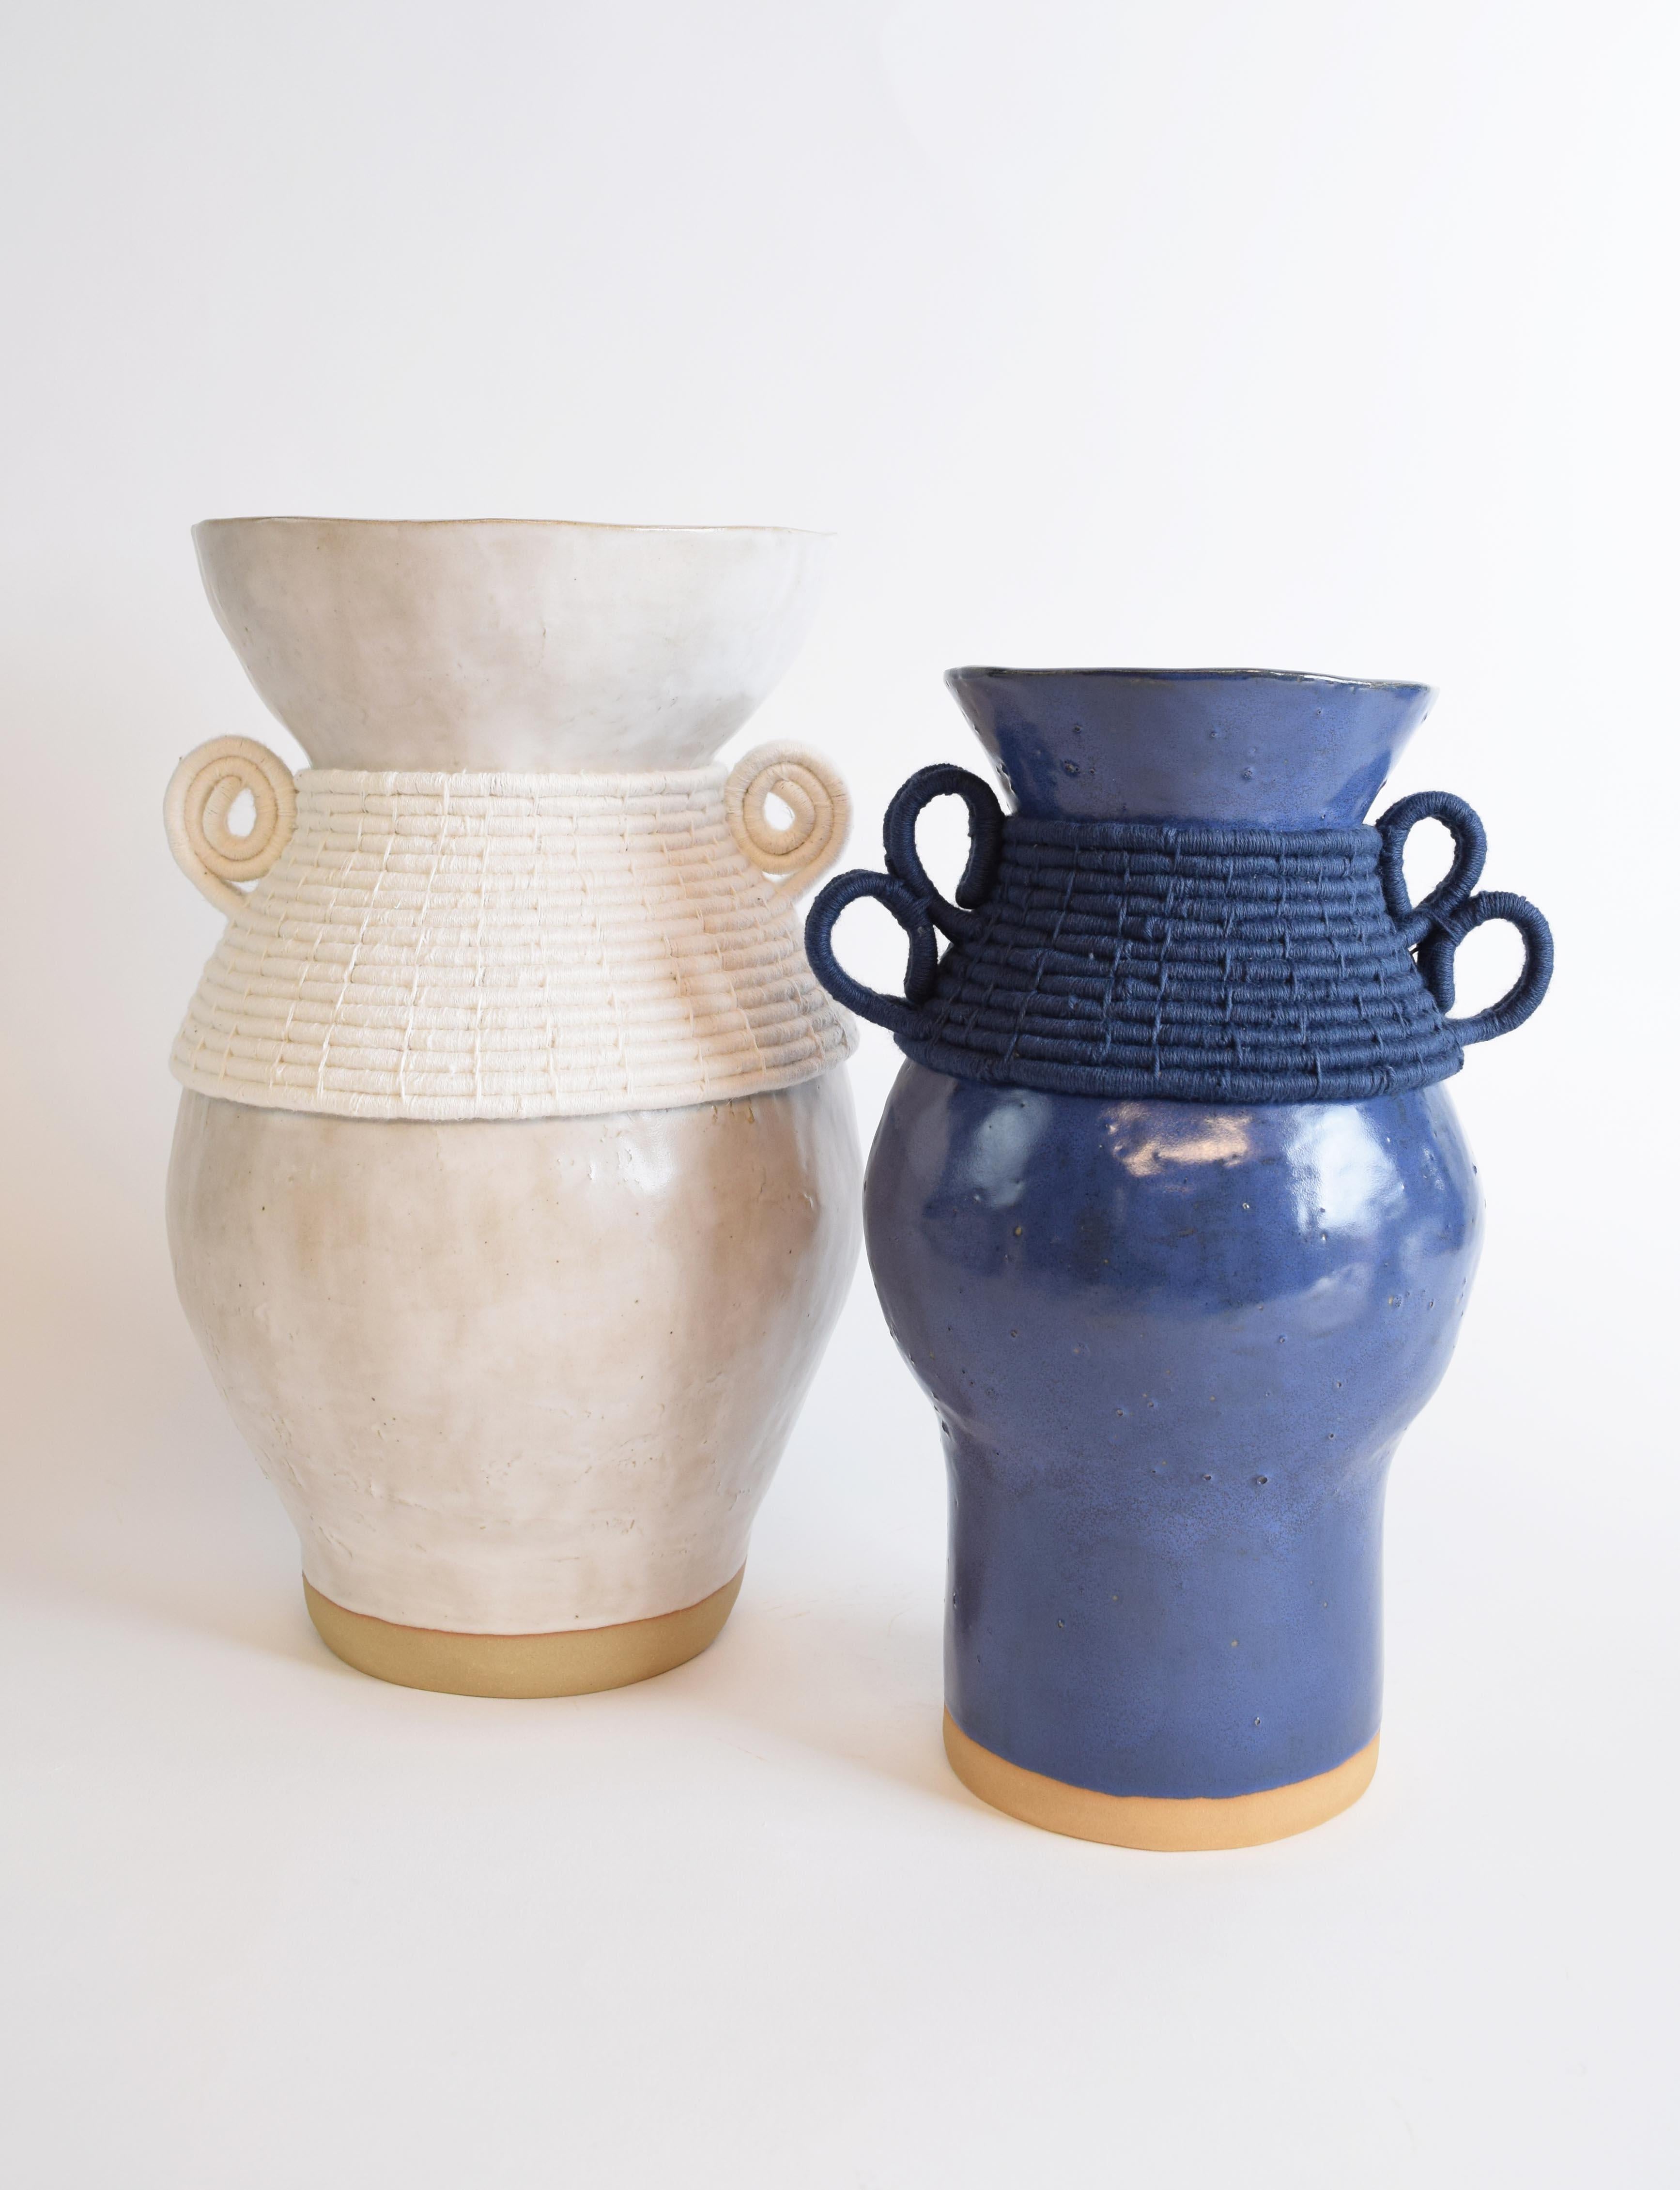 Contemporary One of a Kind Handmade Ceramic Vase #780, Blue Glaze, Woven Navy Cotton Detail